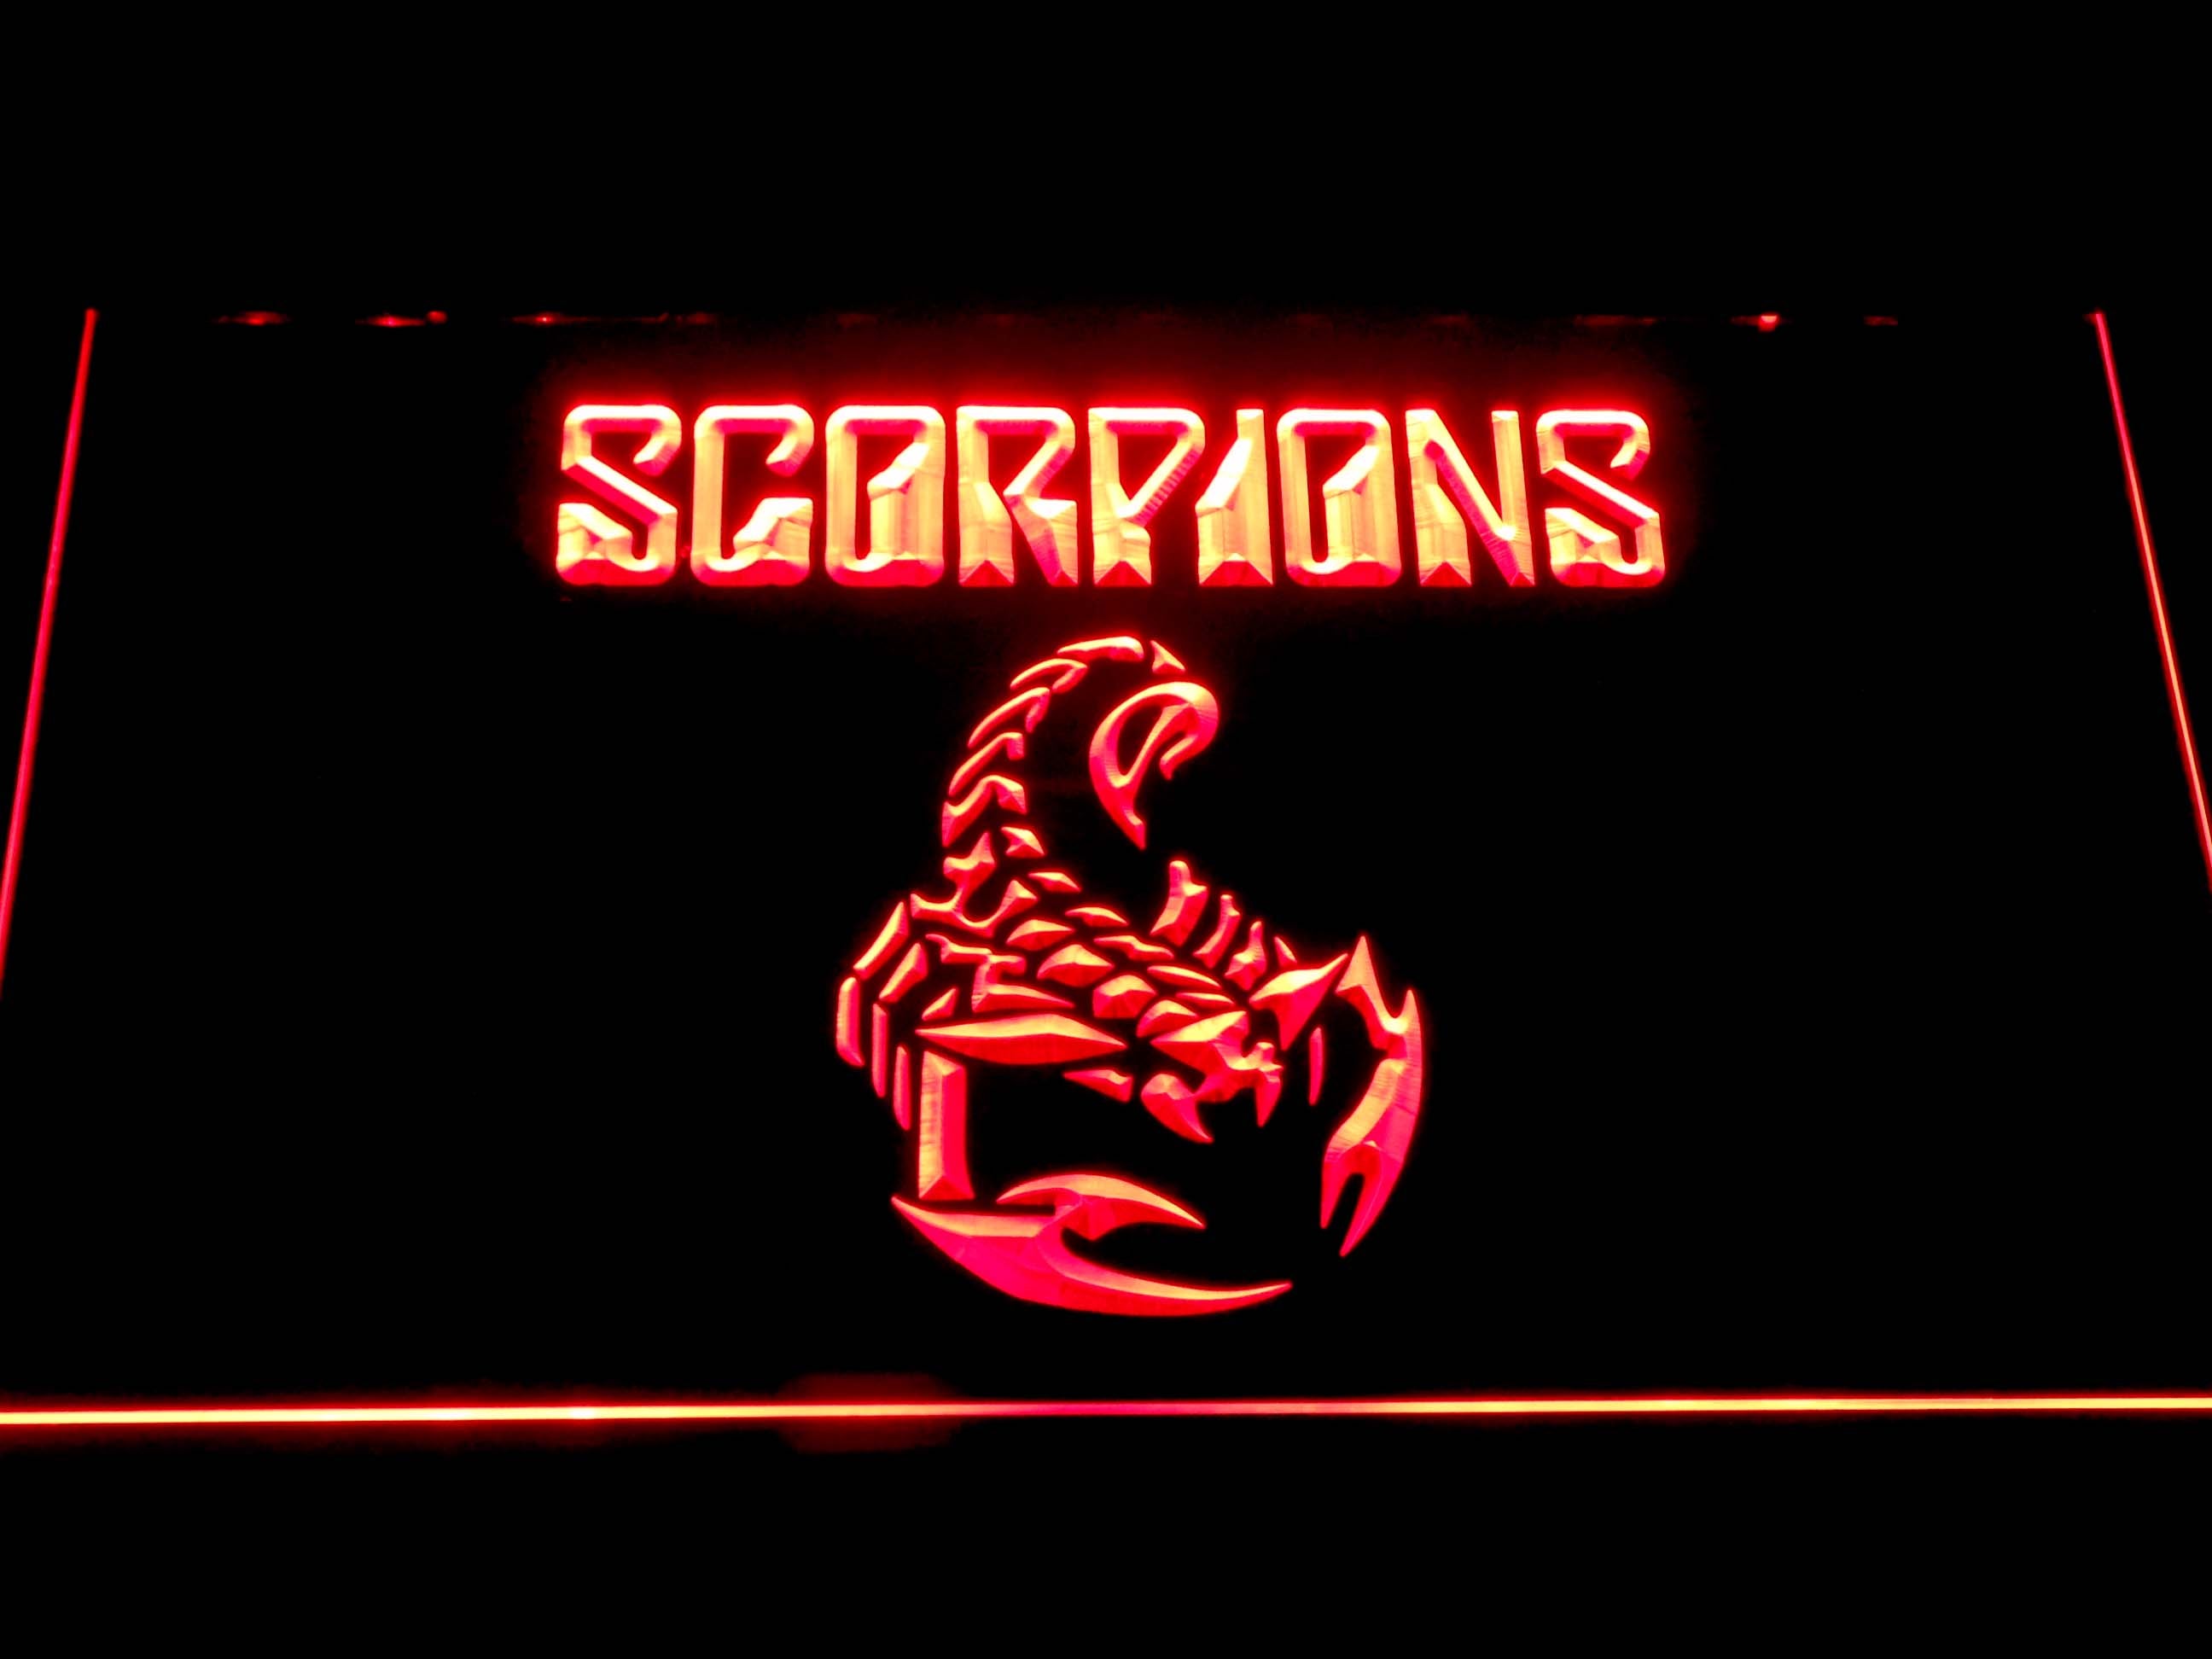 Scorpions Band LED Neon Sign